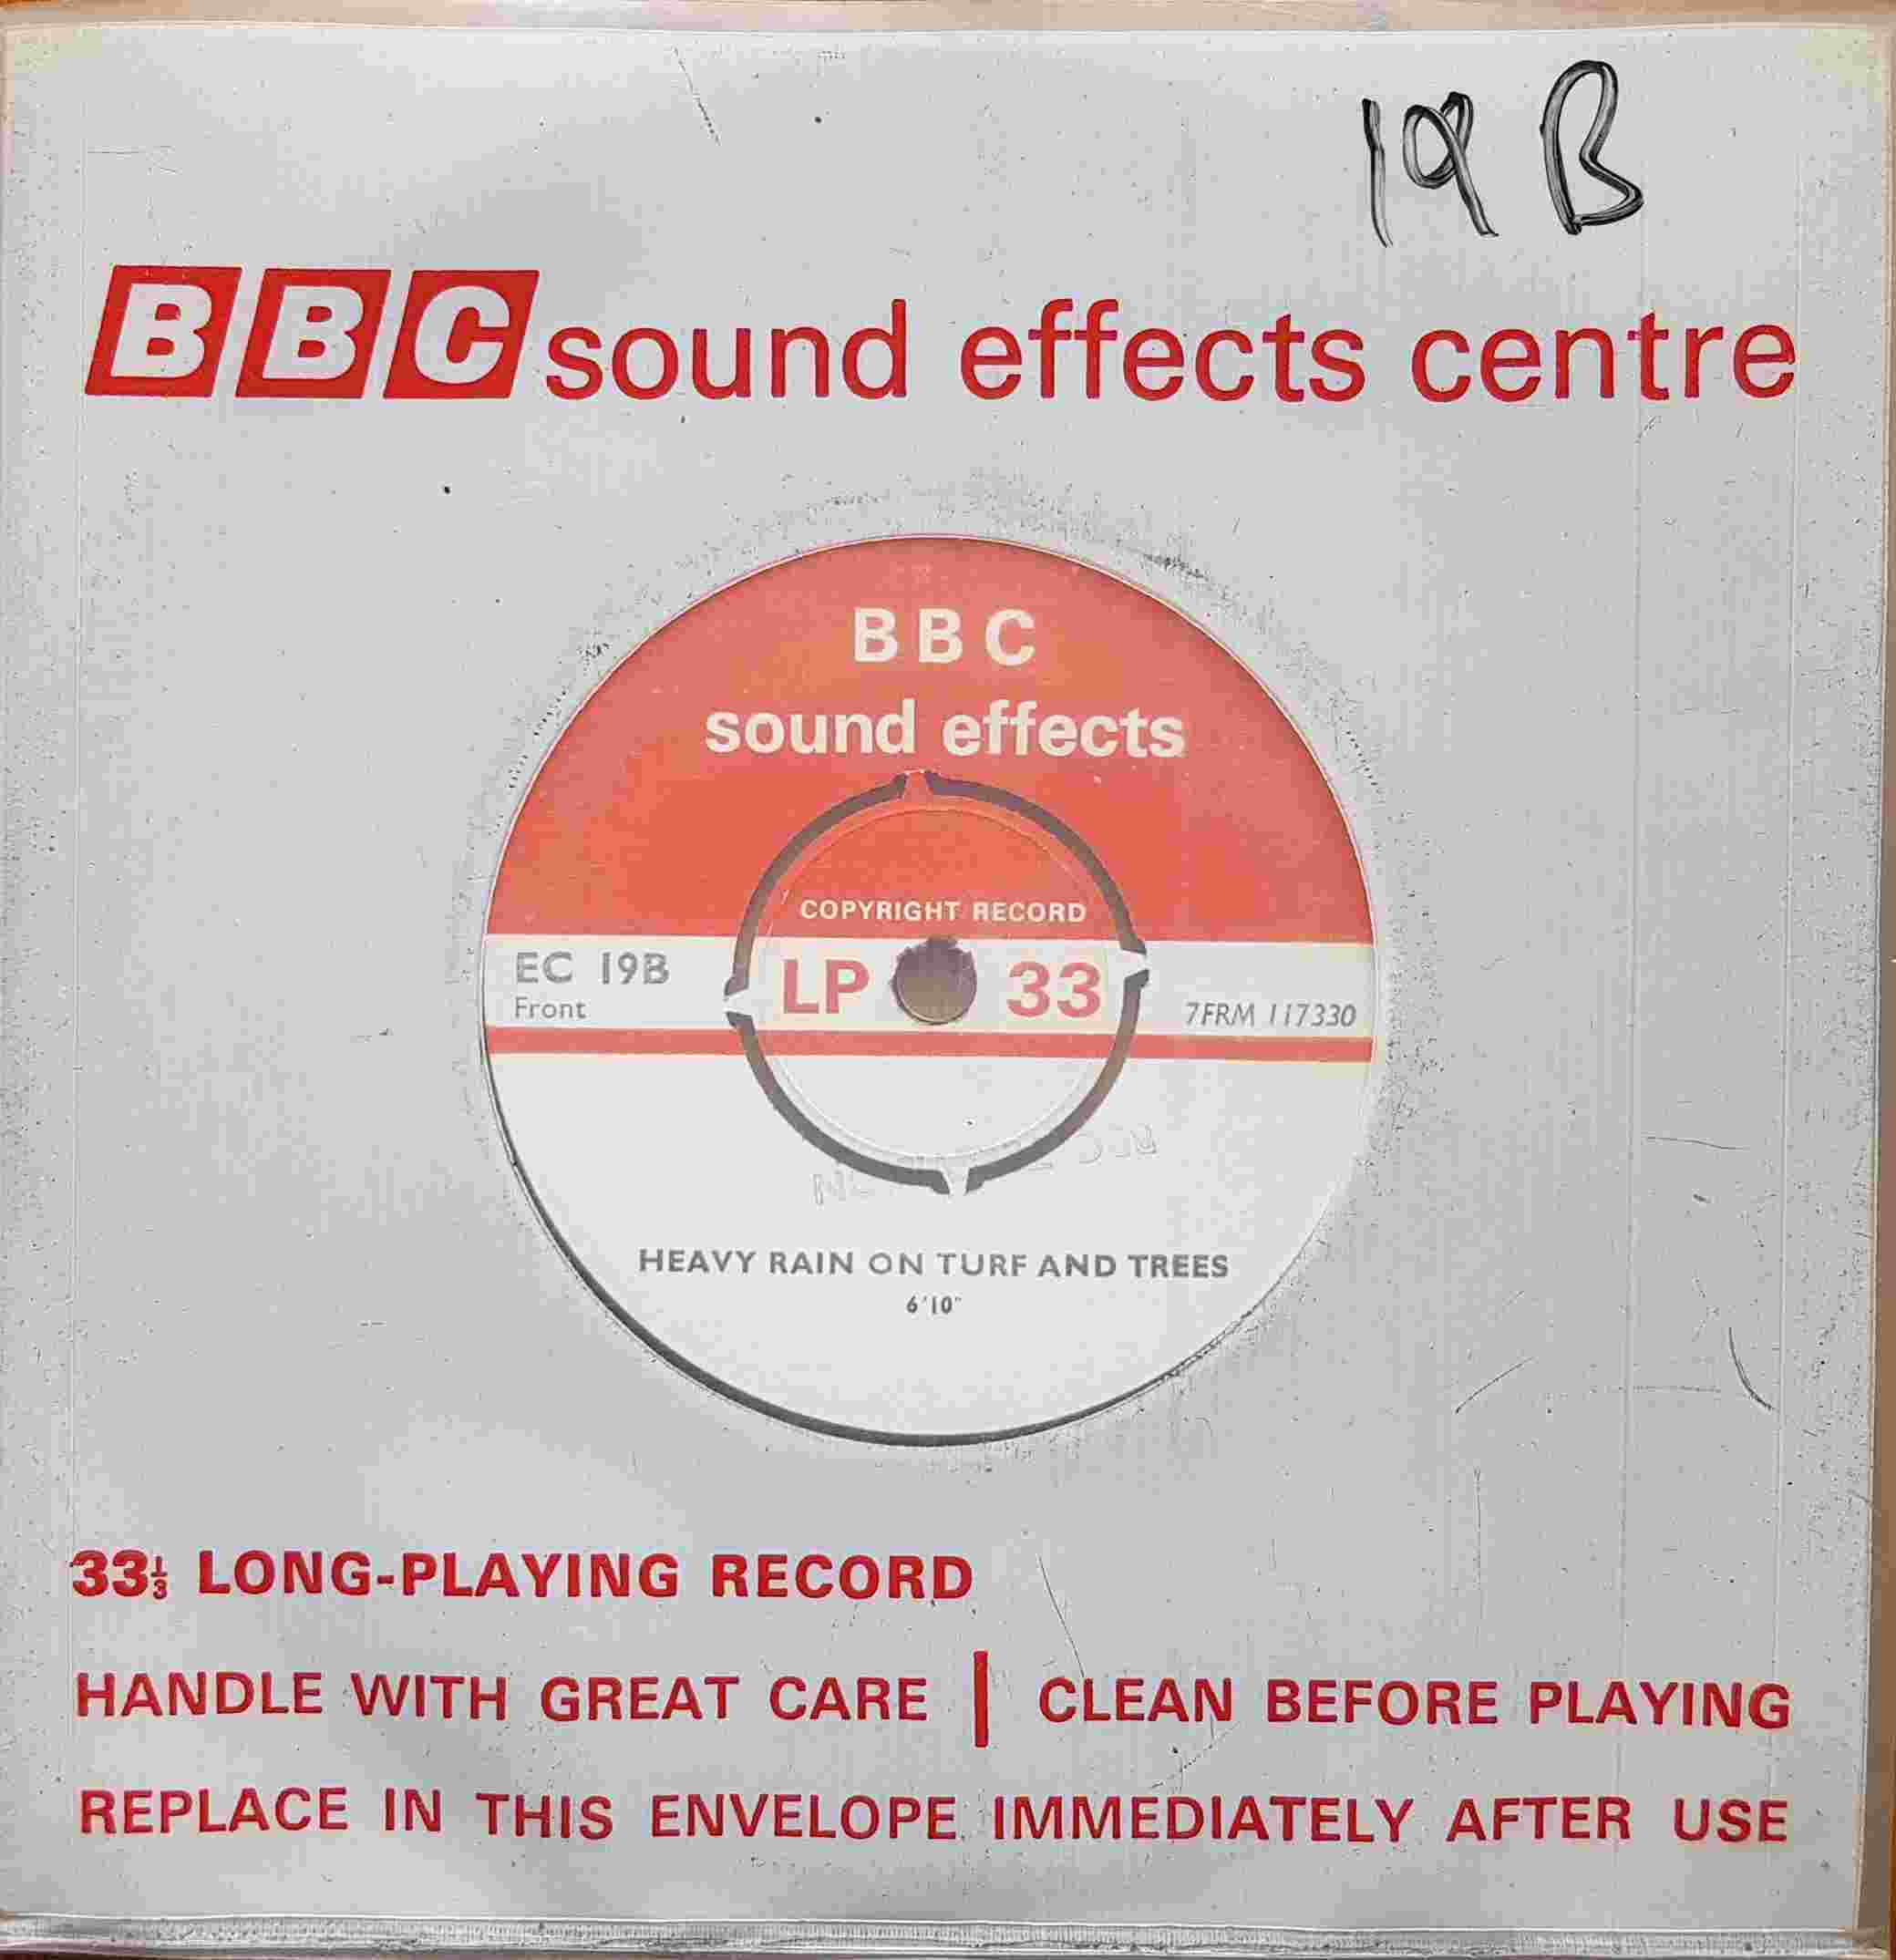 Picture of EC 19B Heavy rain by artist Not registered from the BBC records and Tapes library